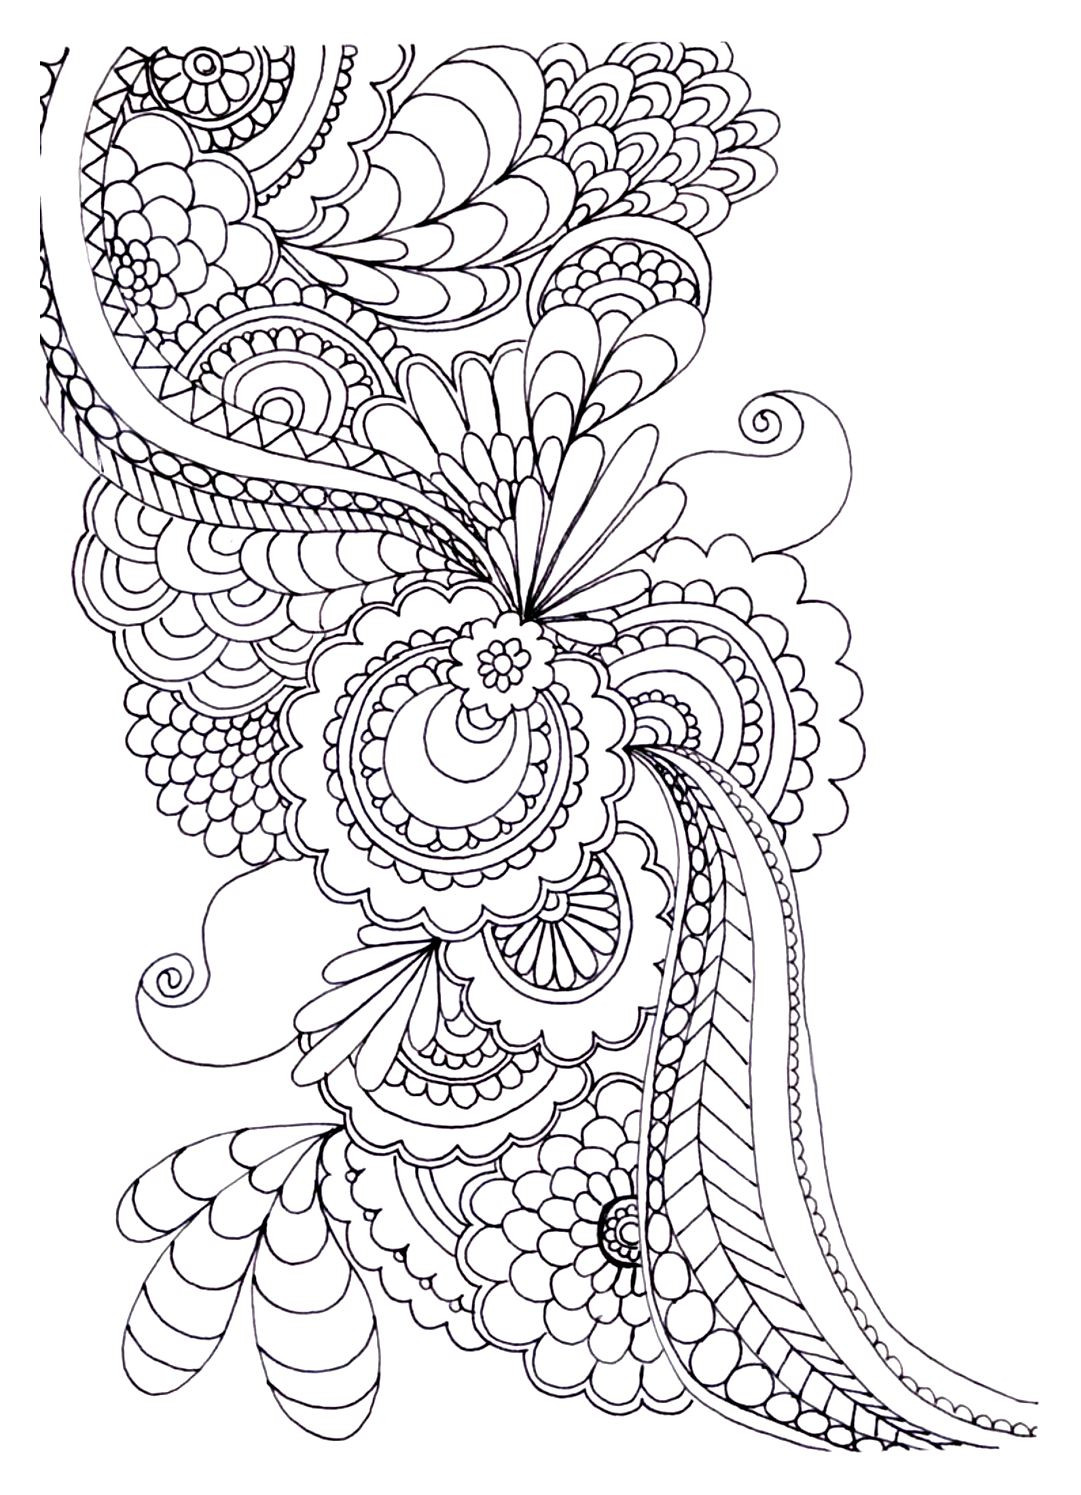 Online Adult Coloring Book
 20 Free Adult Colouring Pages The Organised Housewife